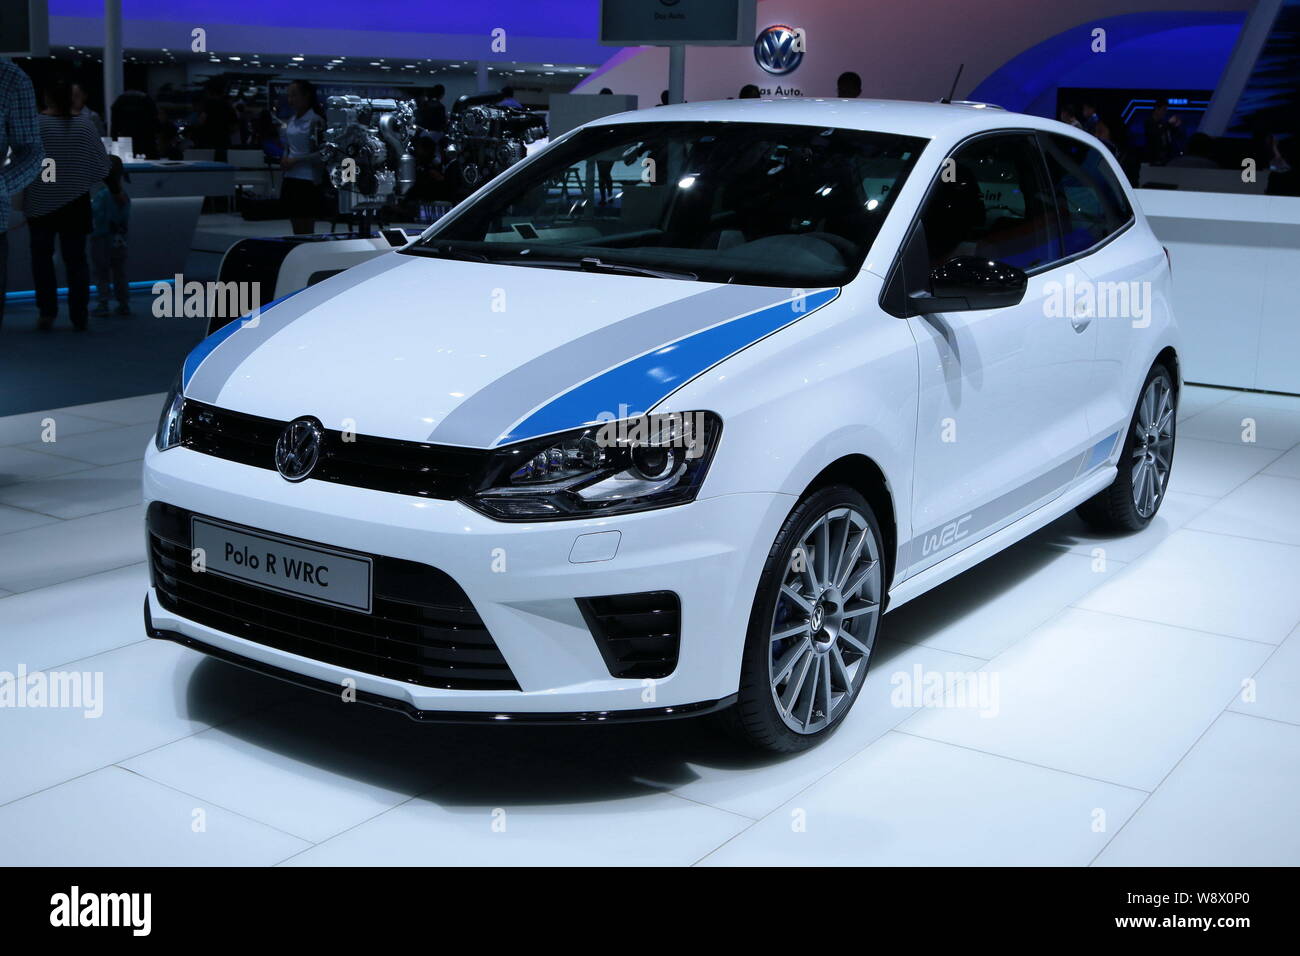 A Volkswagen Polo R WRC car is displayed during the 13th Beijing  International Automotive Exhibition in Beijing, China, 20 April 2014.  Volkswagen Stock Photo - Alamy